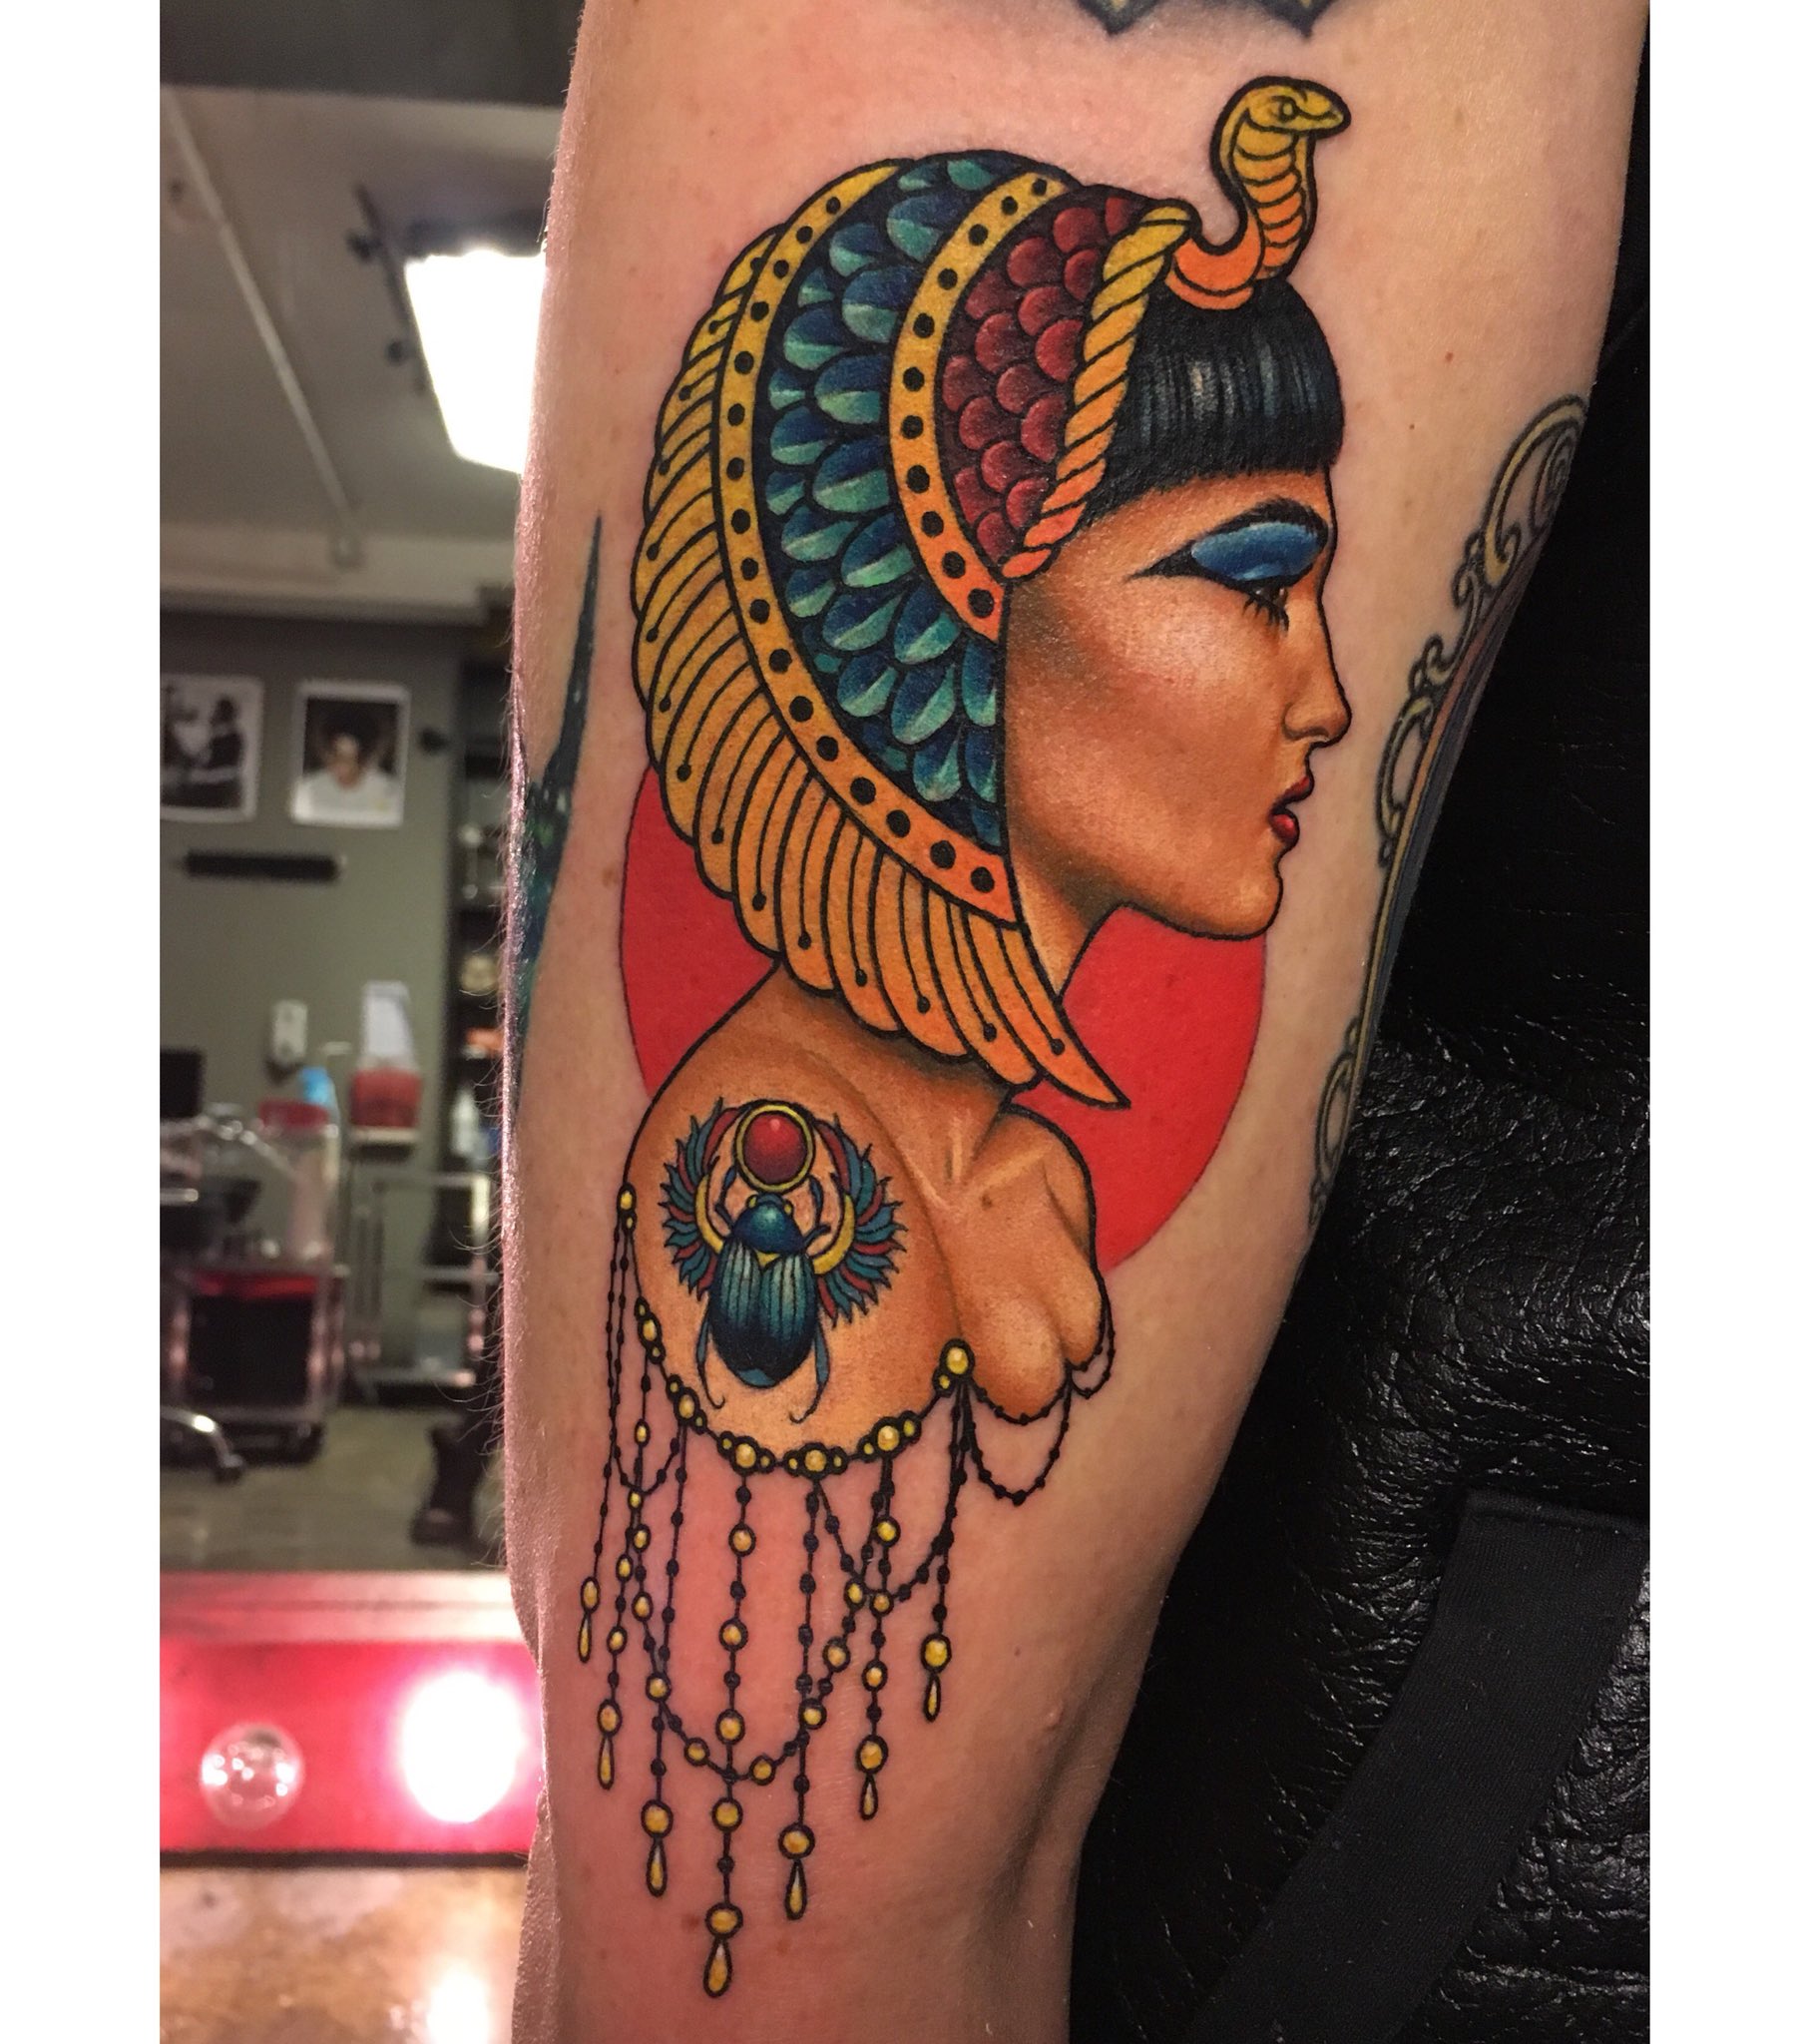 Absolutely loved doing this Egyptian goddess!🖤☀️🌿thank you Emma!  @anonymousduck100 • • • #tattoo #forarmtattoo #egyptian... | Instagram